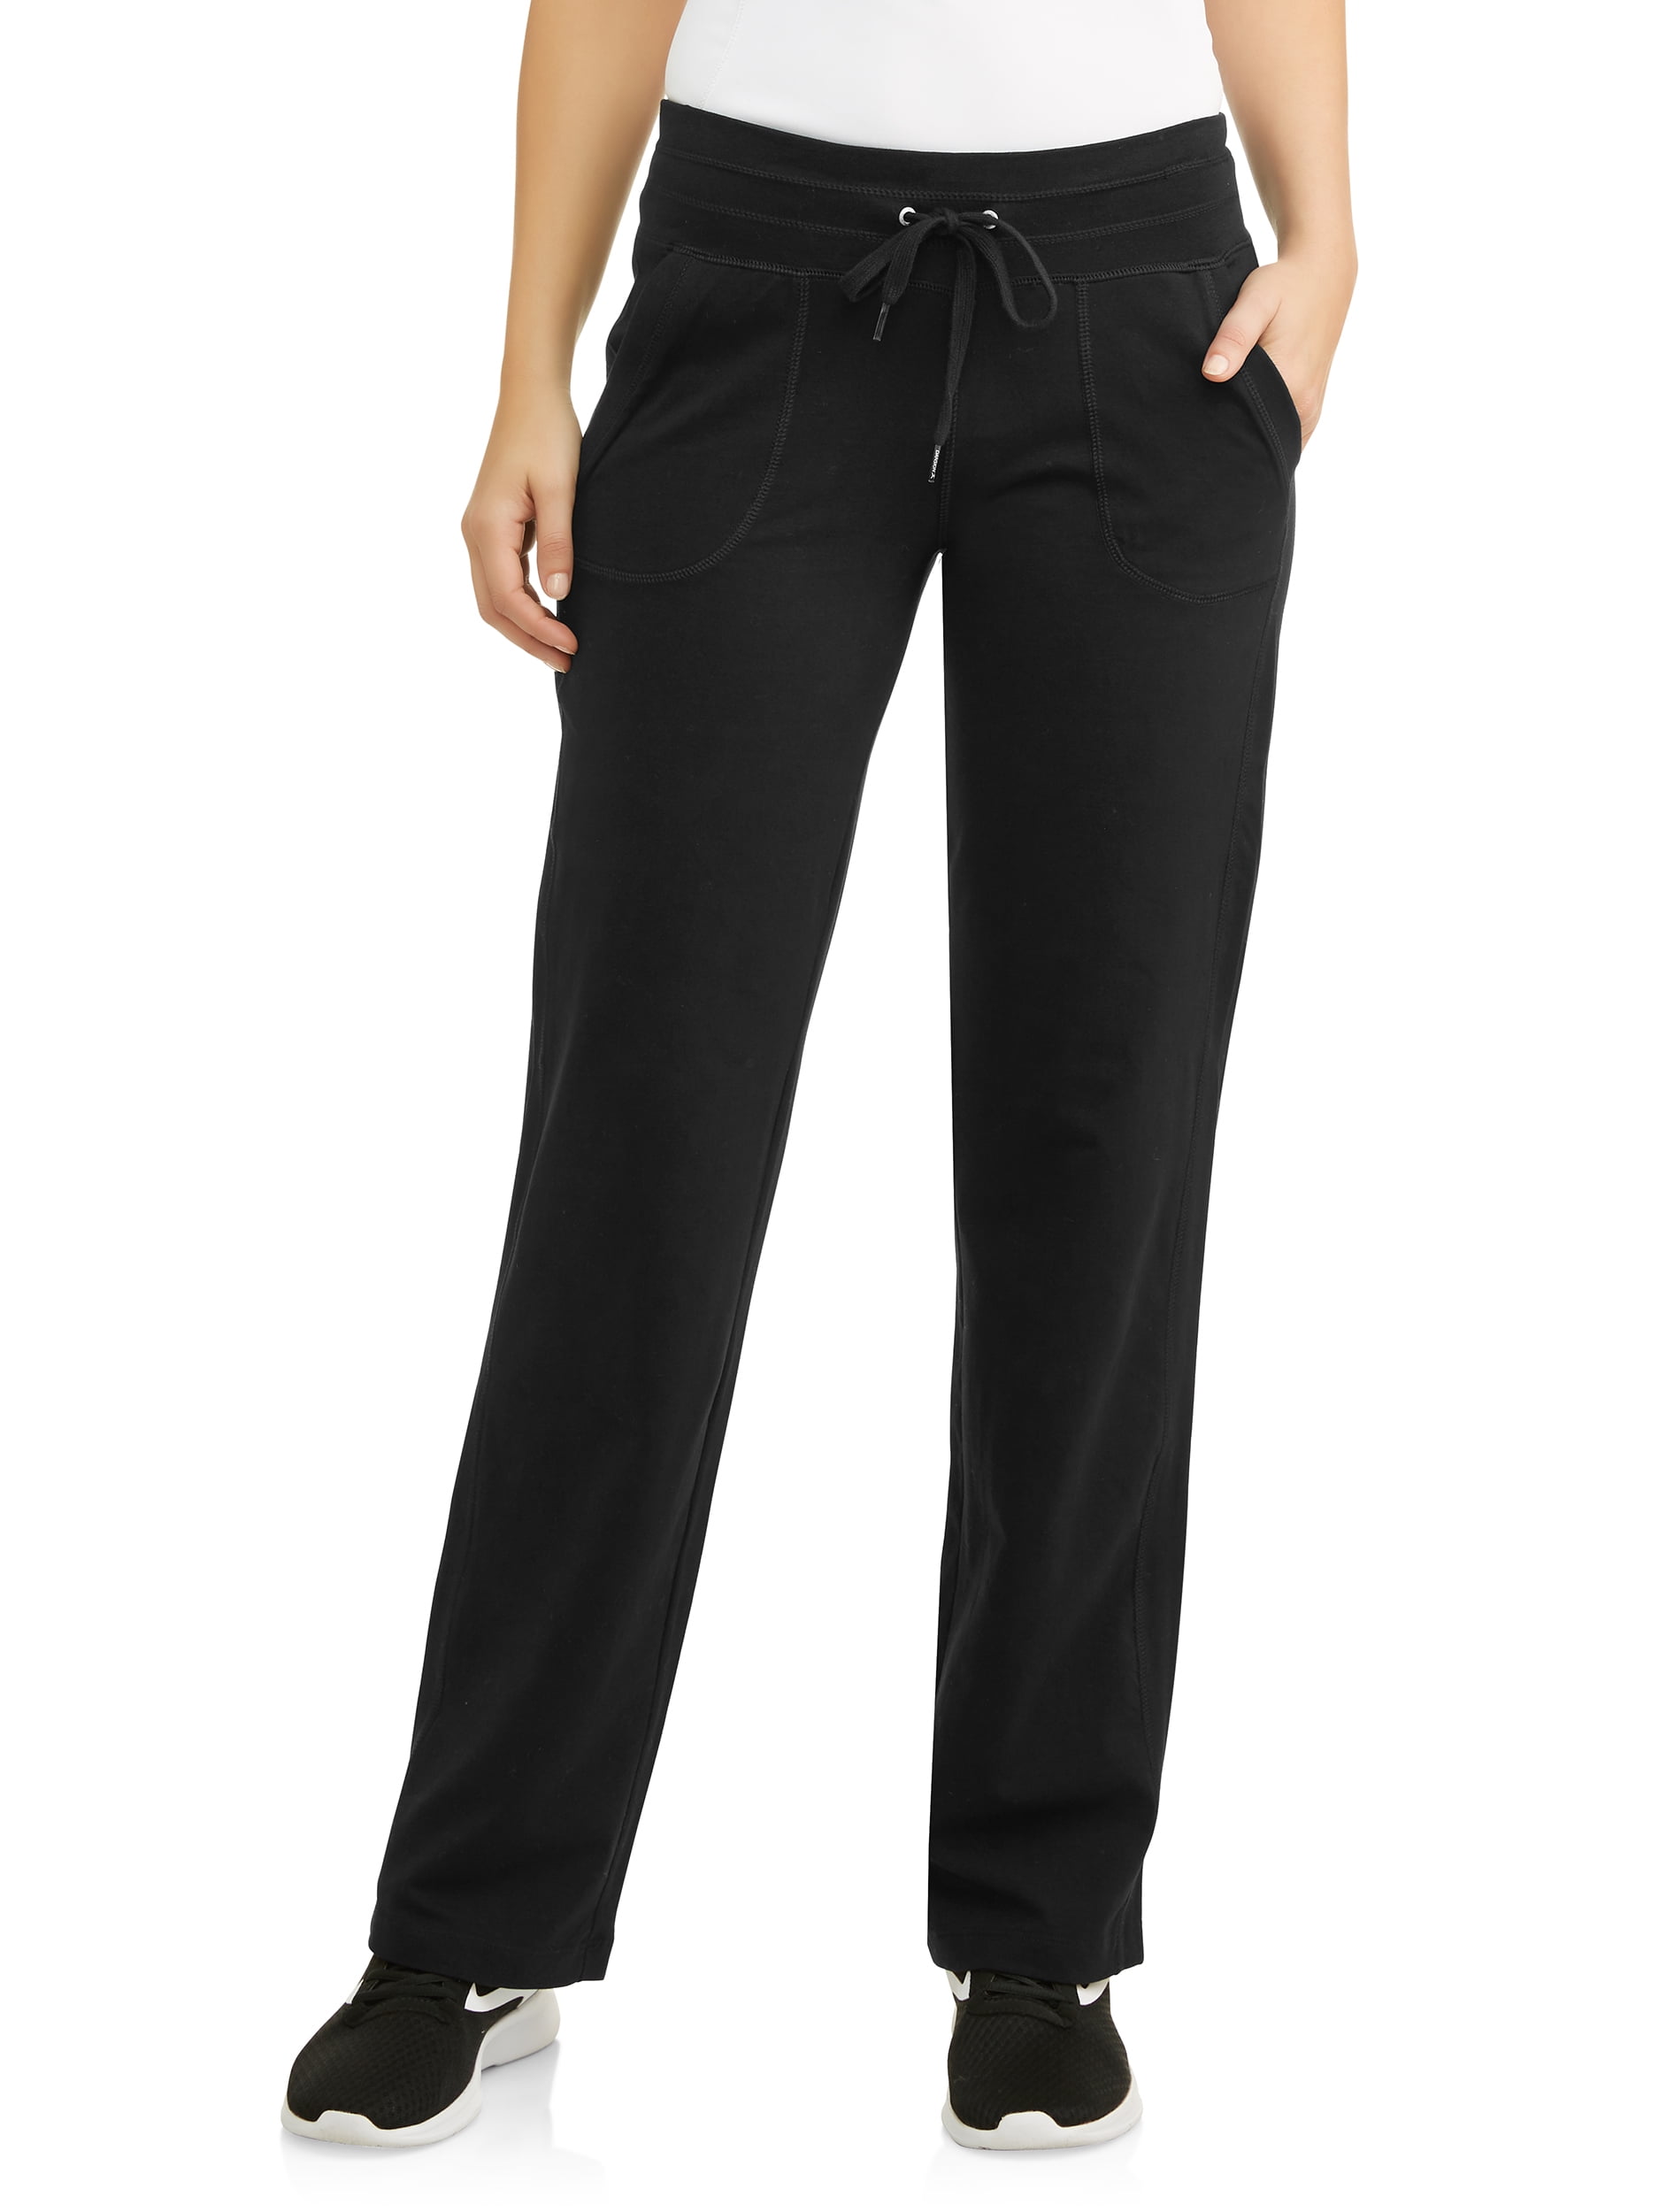 Athletic Works Women's Athleisure Wide Leg Pant Available in